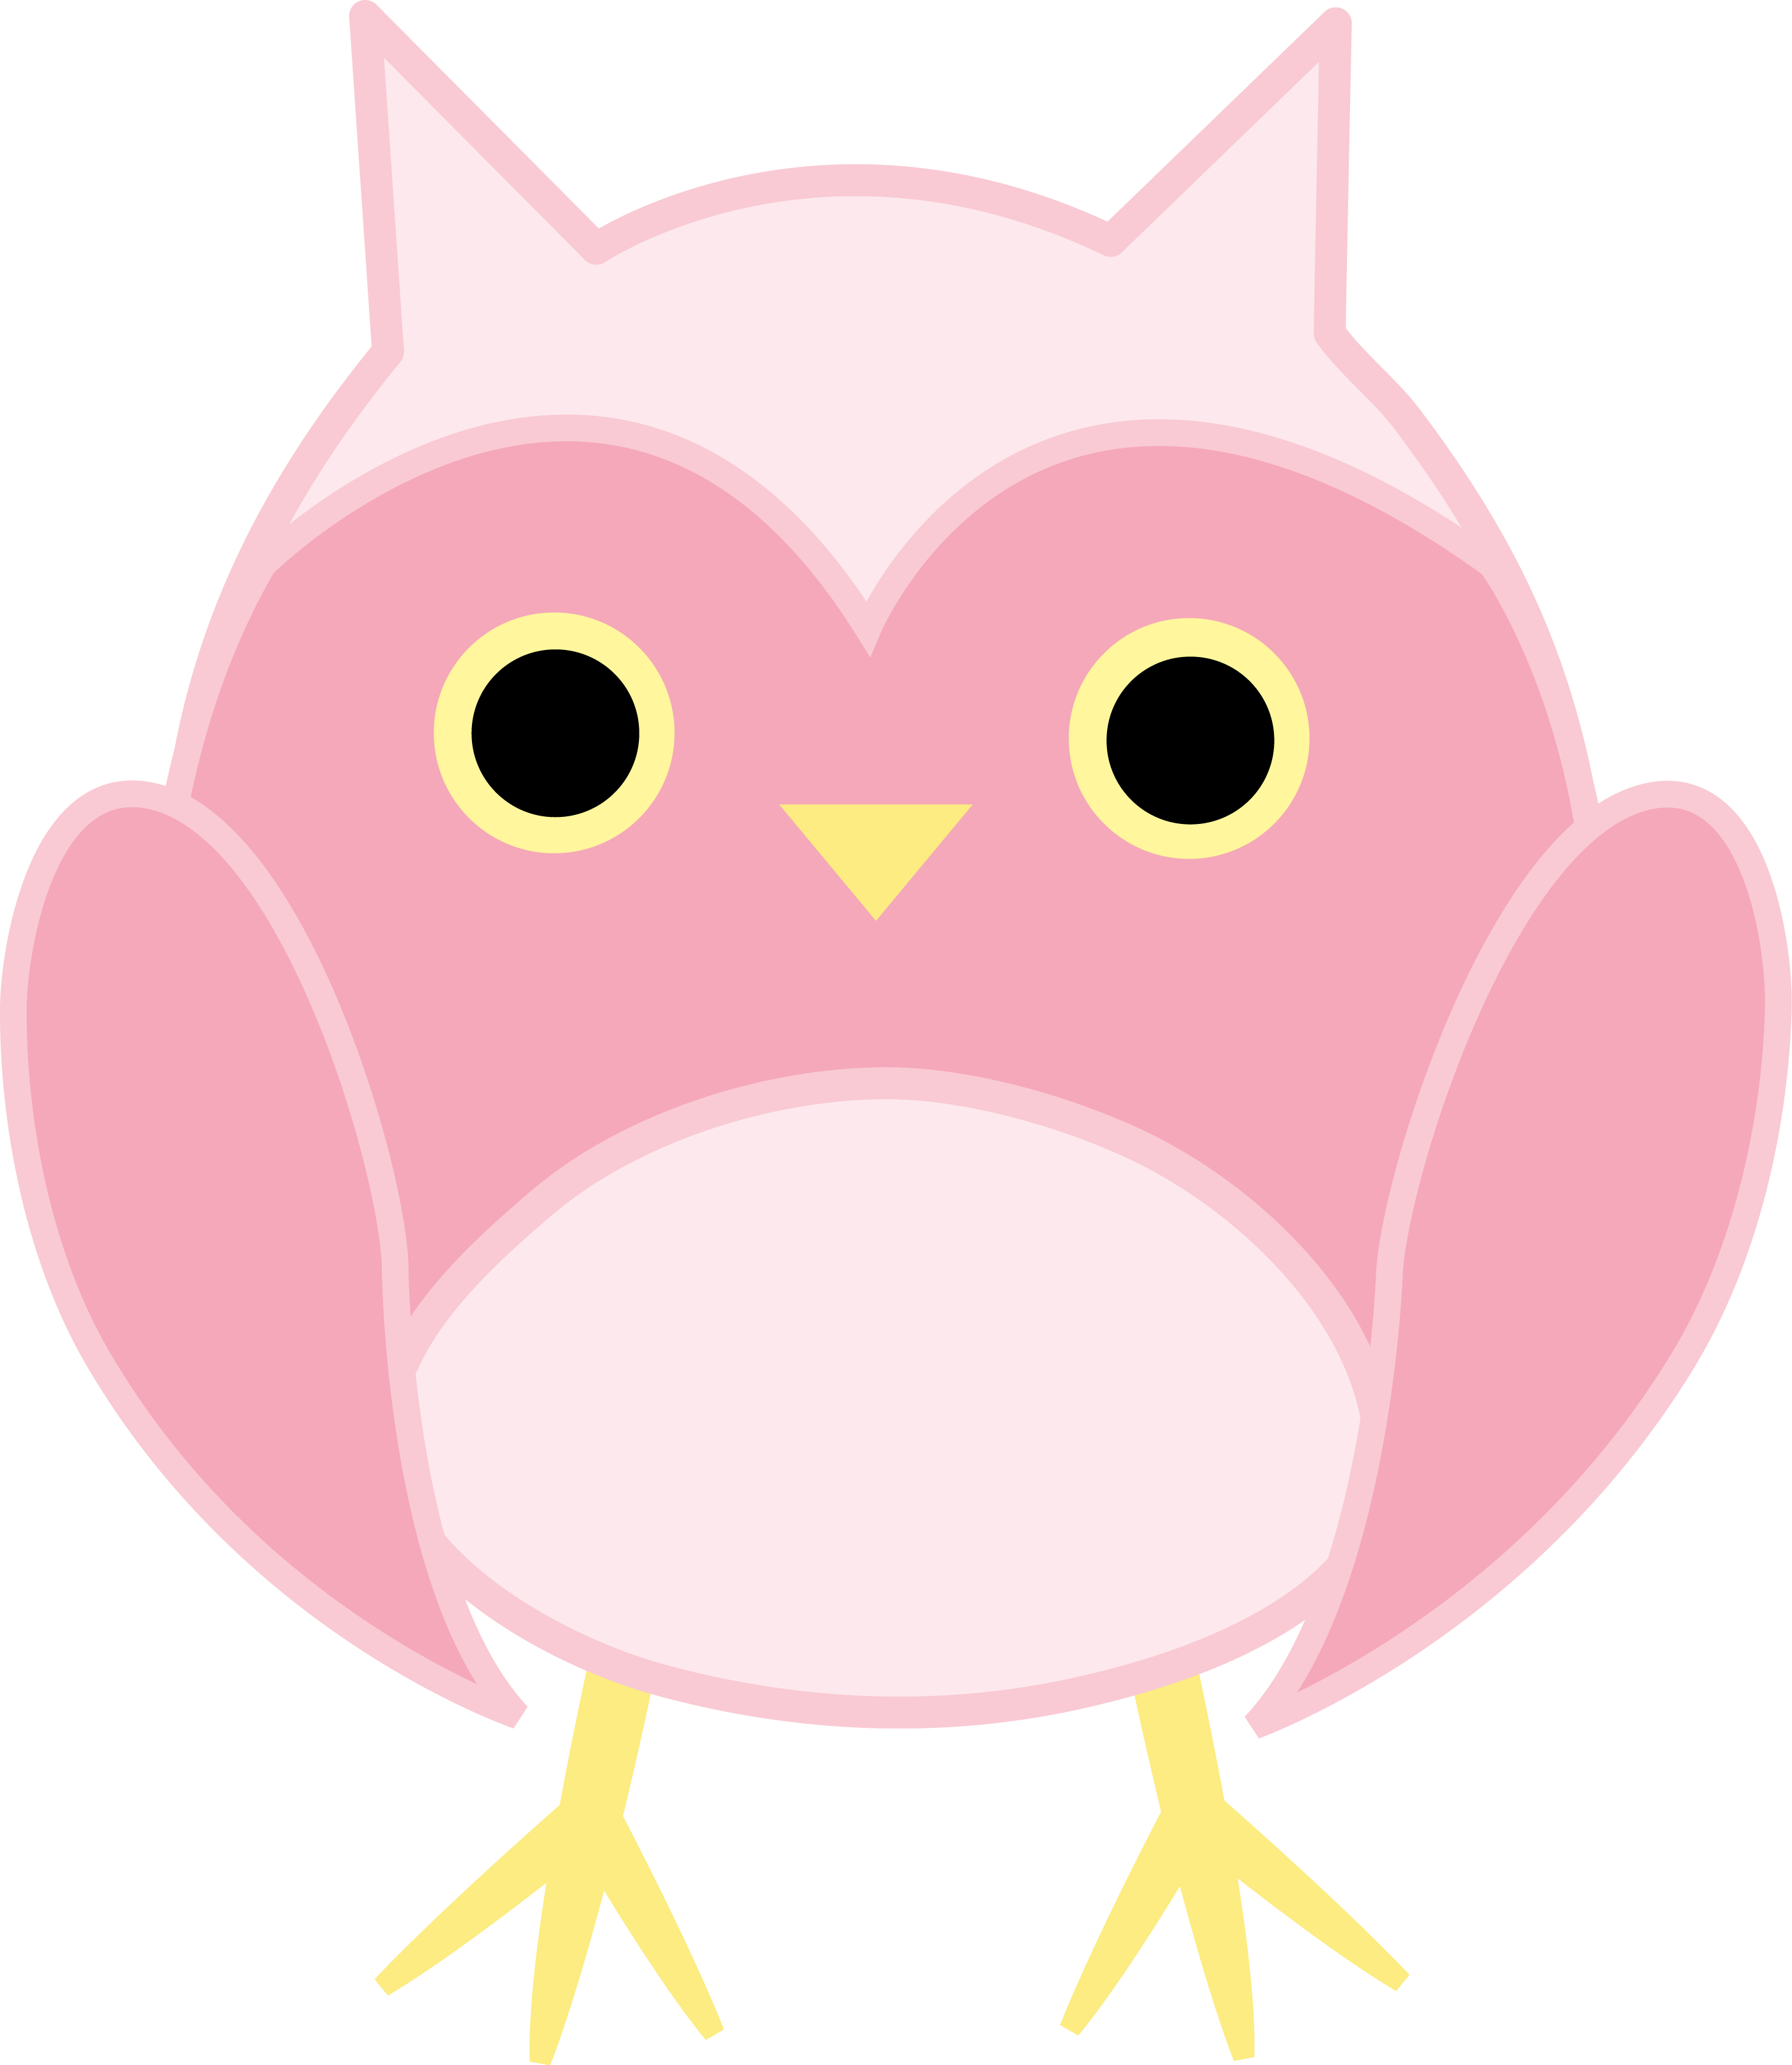 Images For > Baby Owl On Branch Clip Art